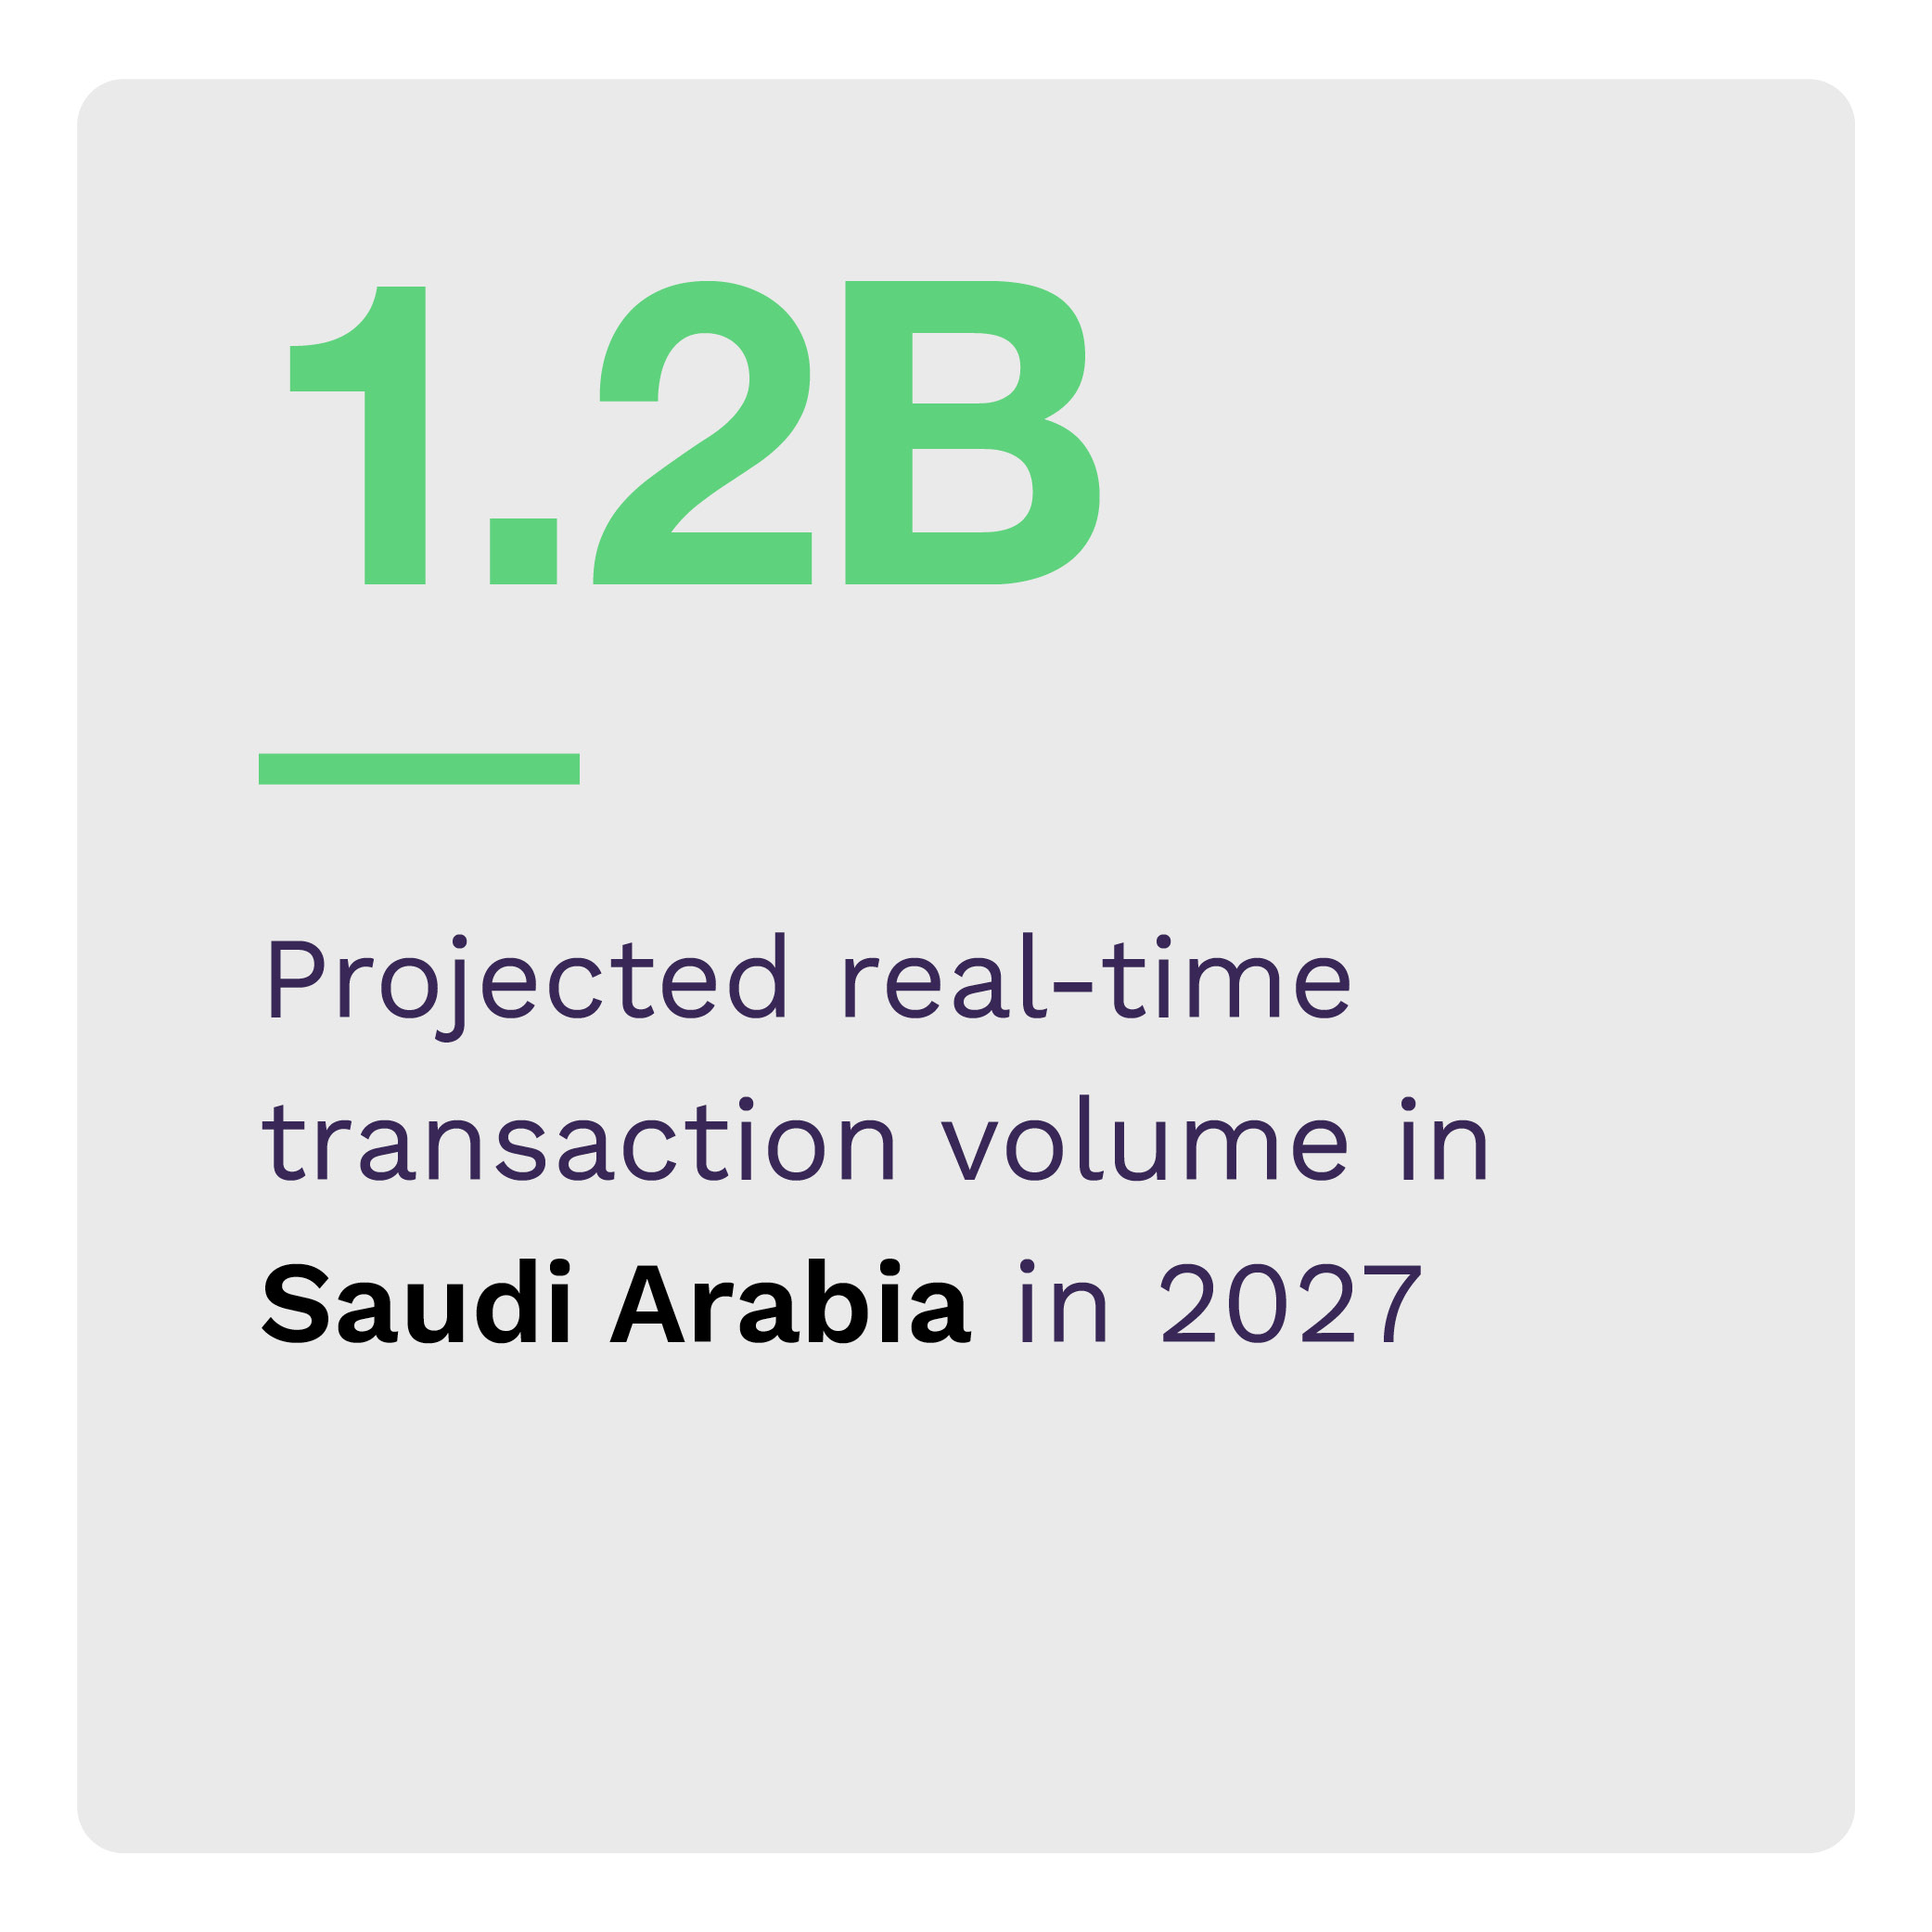 1.2B: Projected real-time transaction volume in Saudi Arabia in 2027